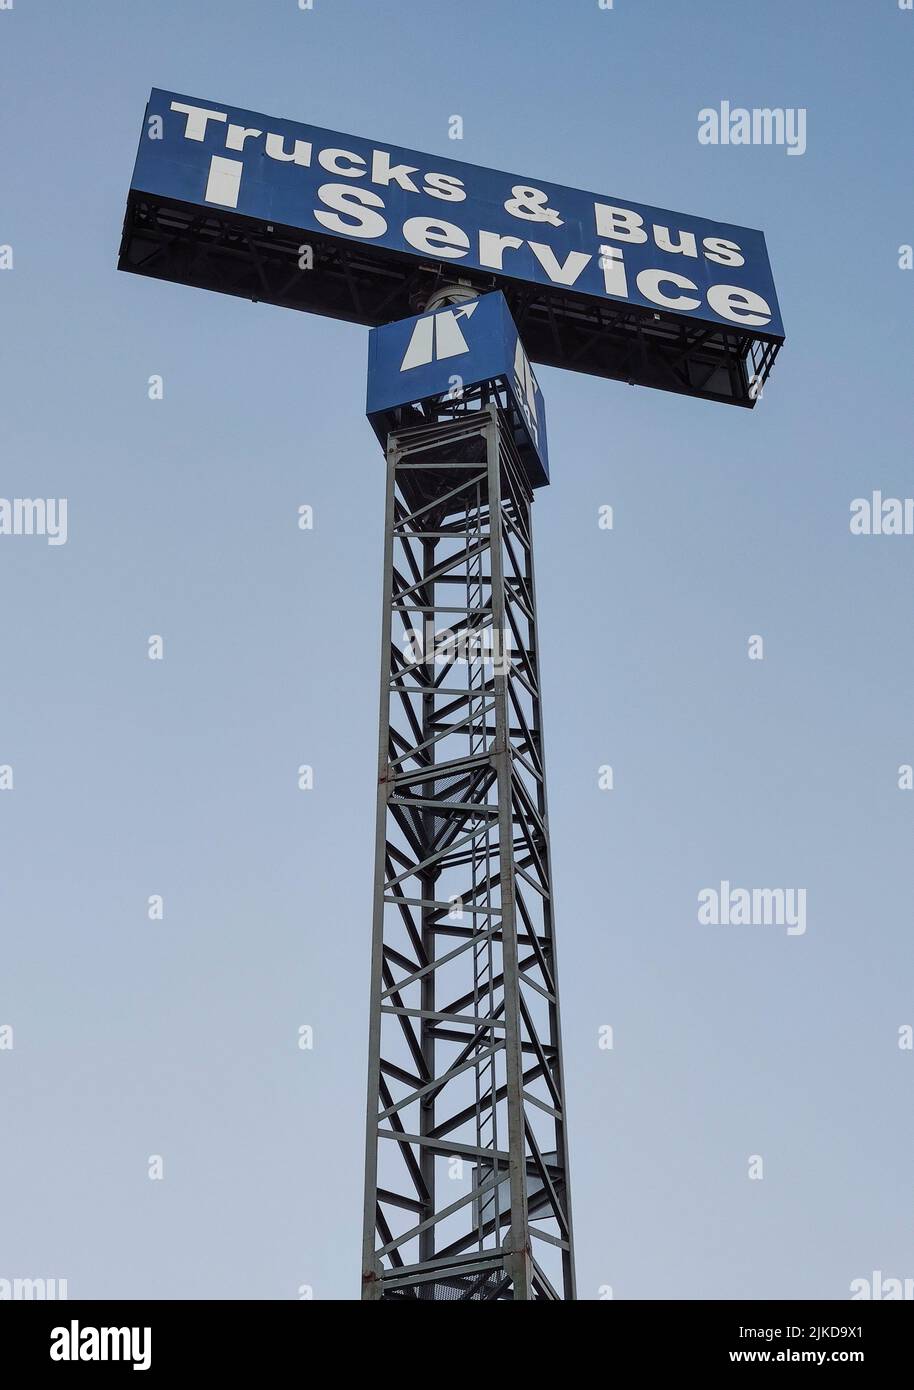 Trucks and bus service sign pole over blue sky. Stock Photo